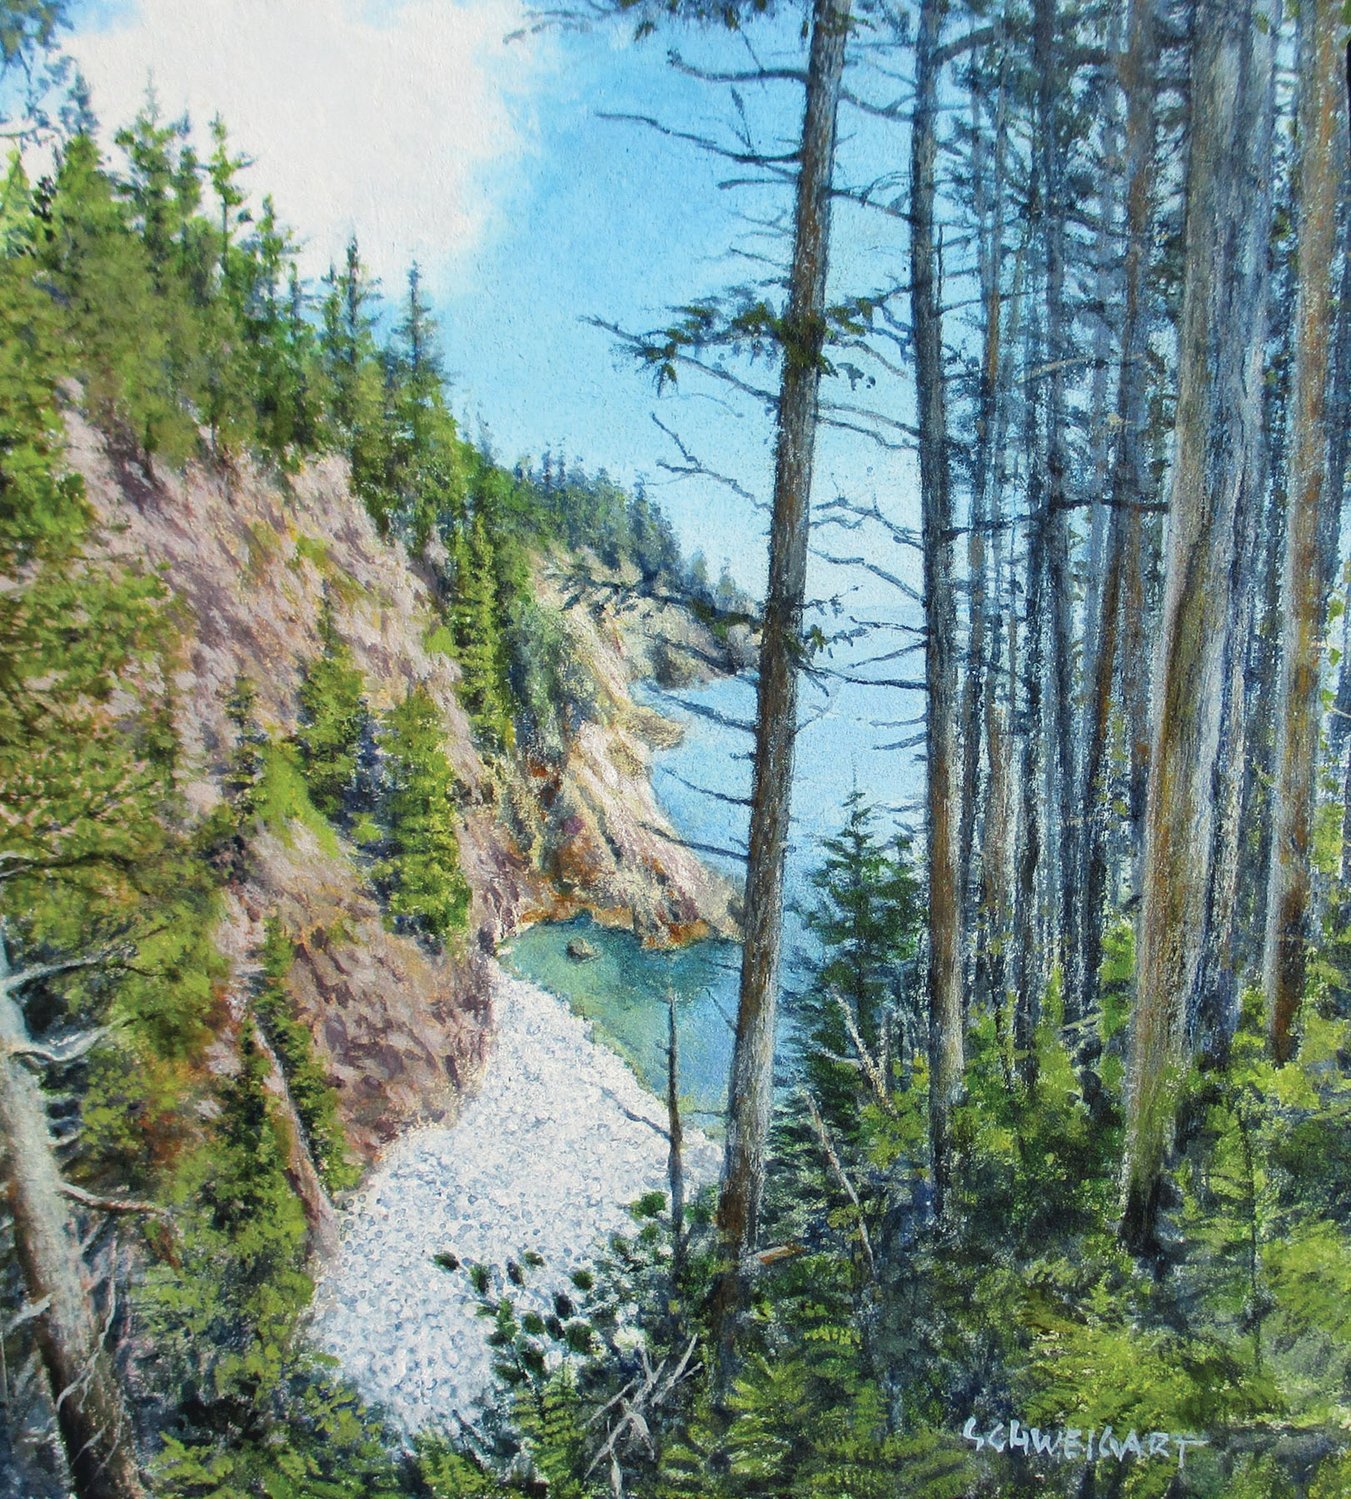 “Overlook From Trailhead” is by Michael Schweigart.